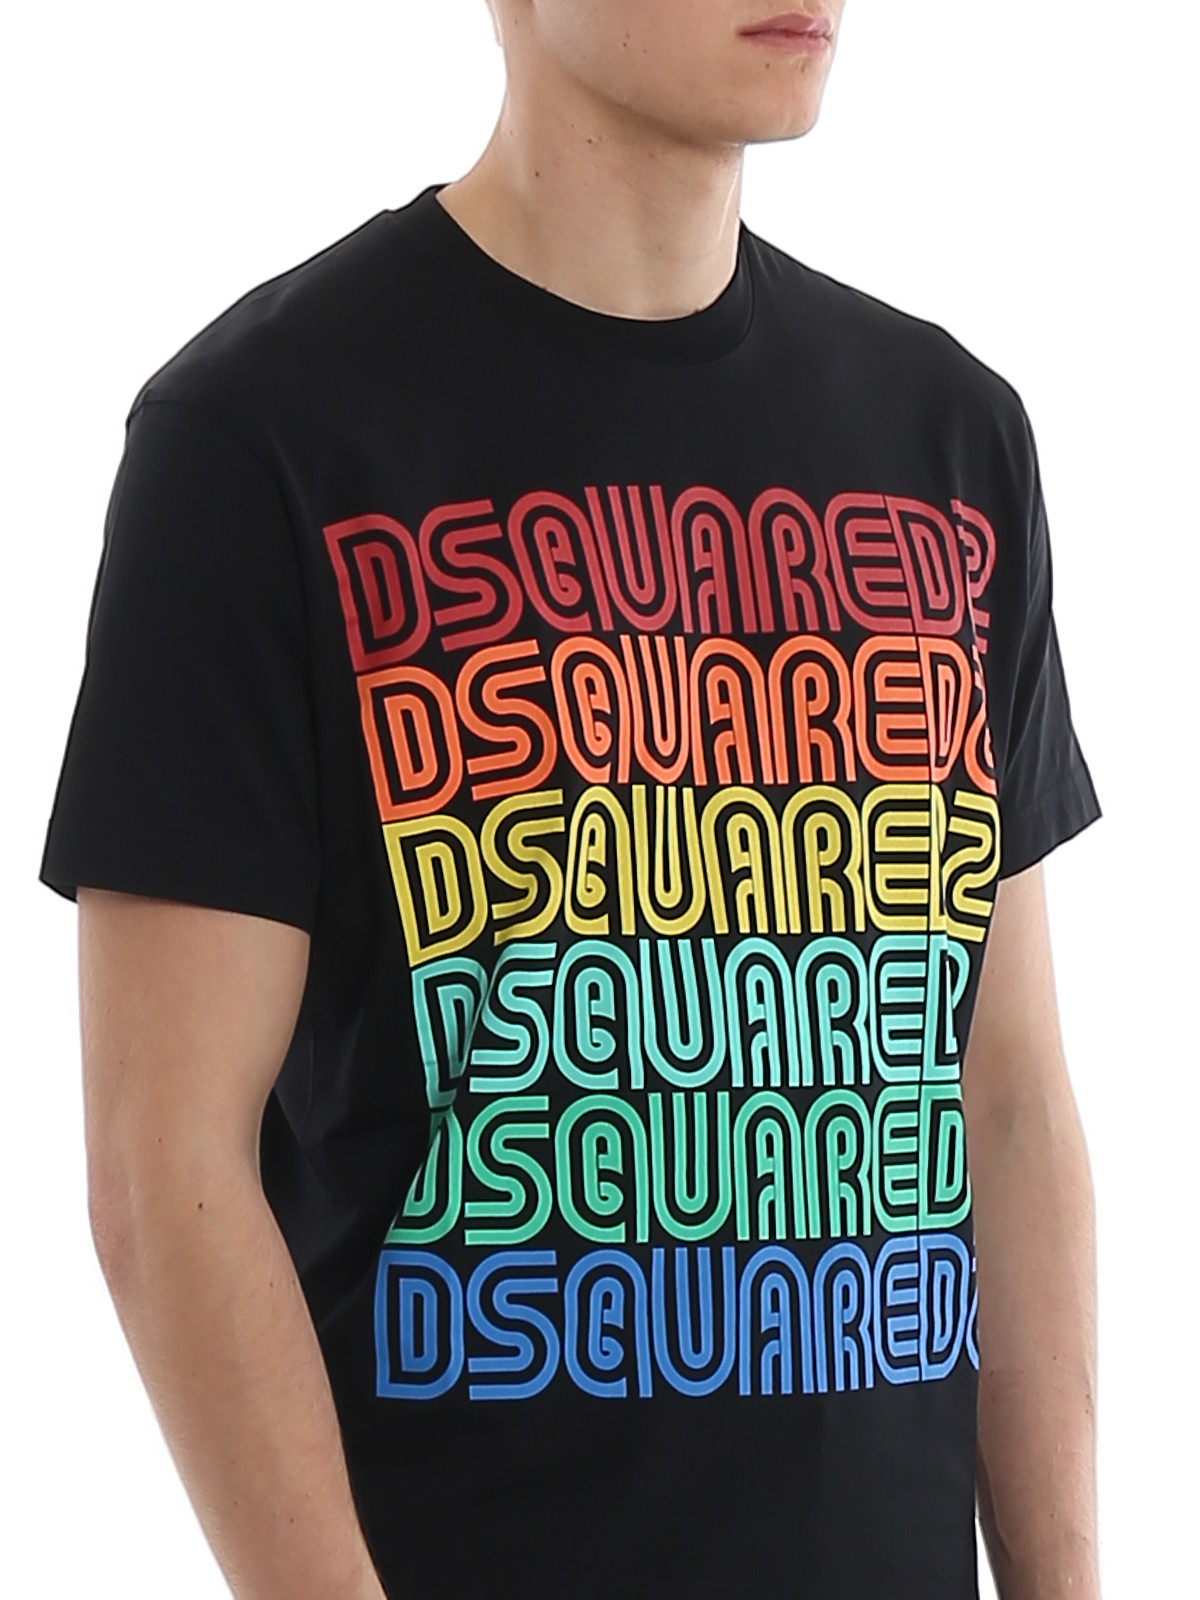 buy dsquared online